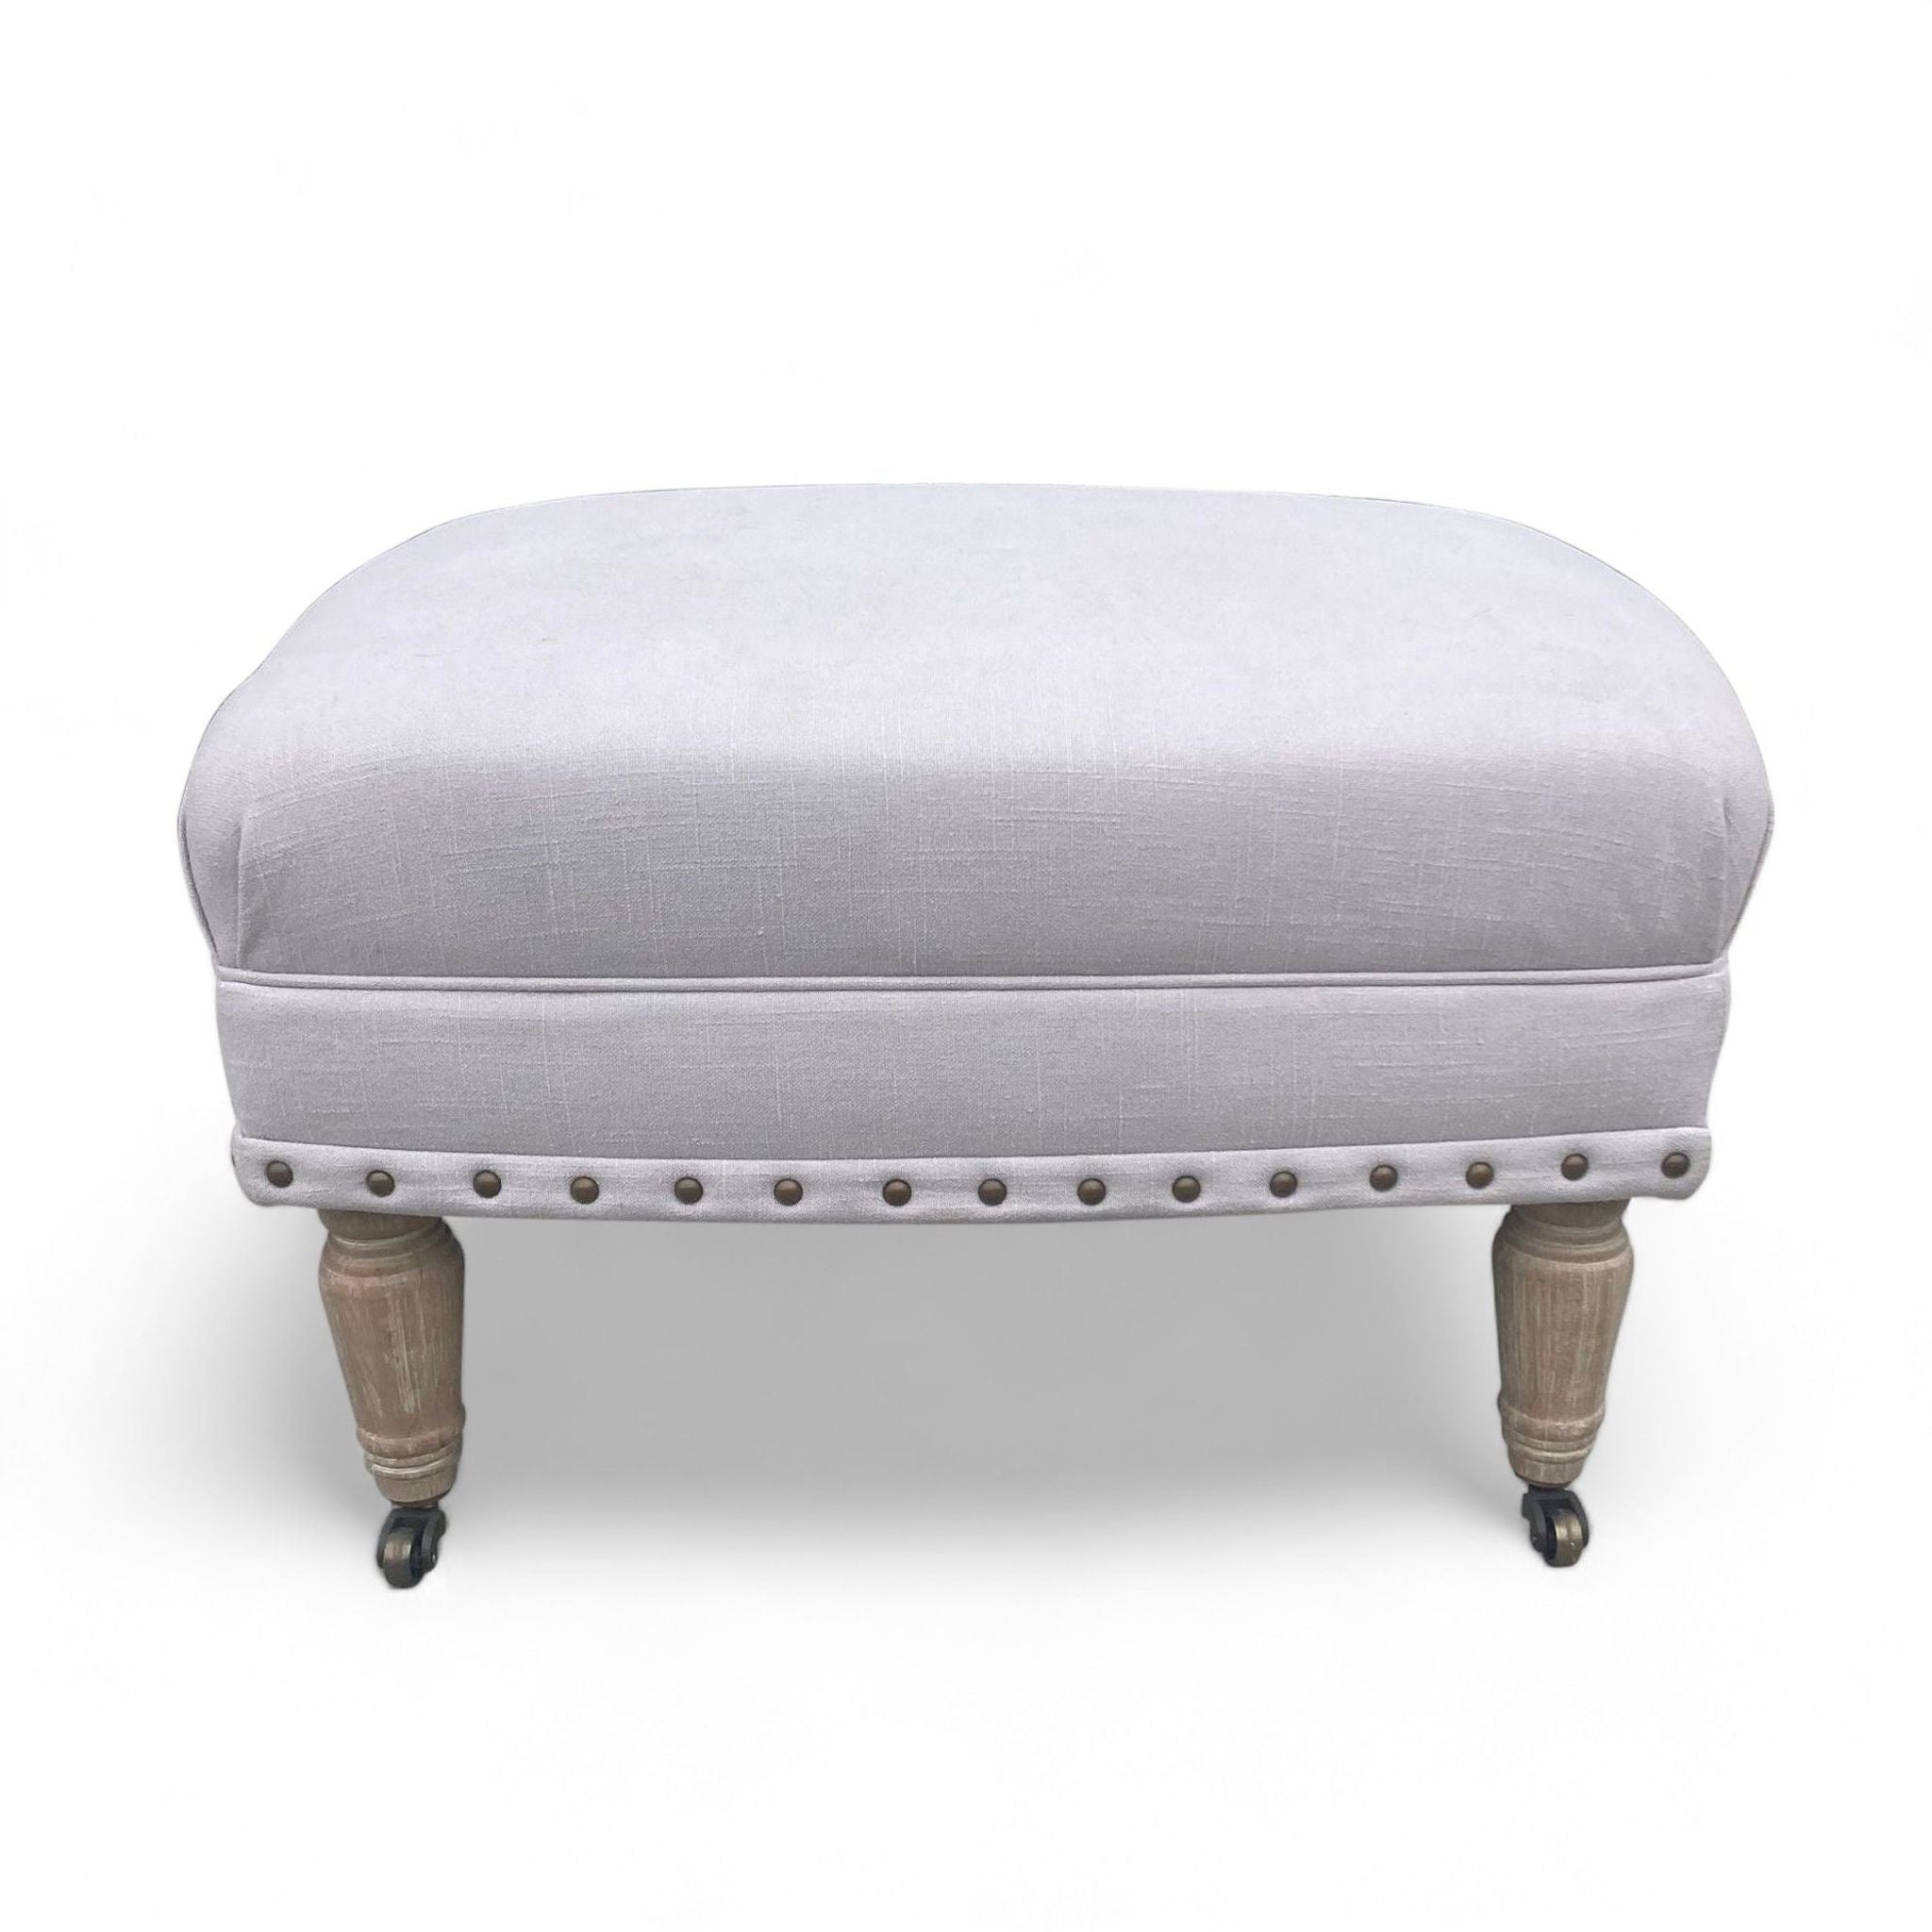 Reperch classic ottoman, light gray upholstery, fluted wooden legs, and nail head detail.